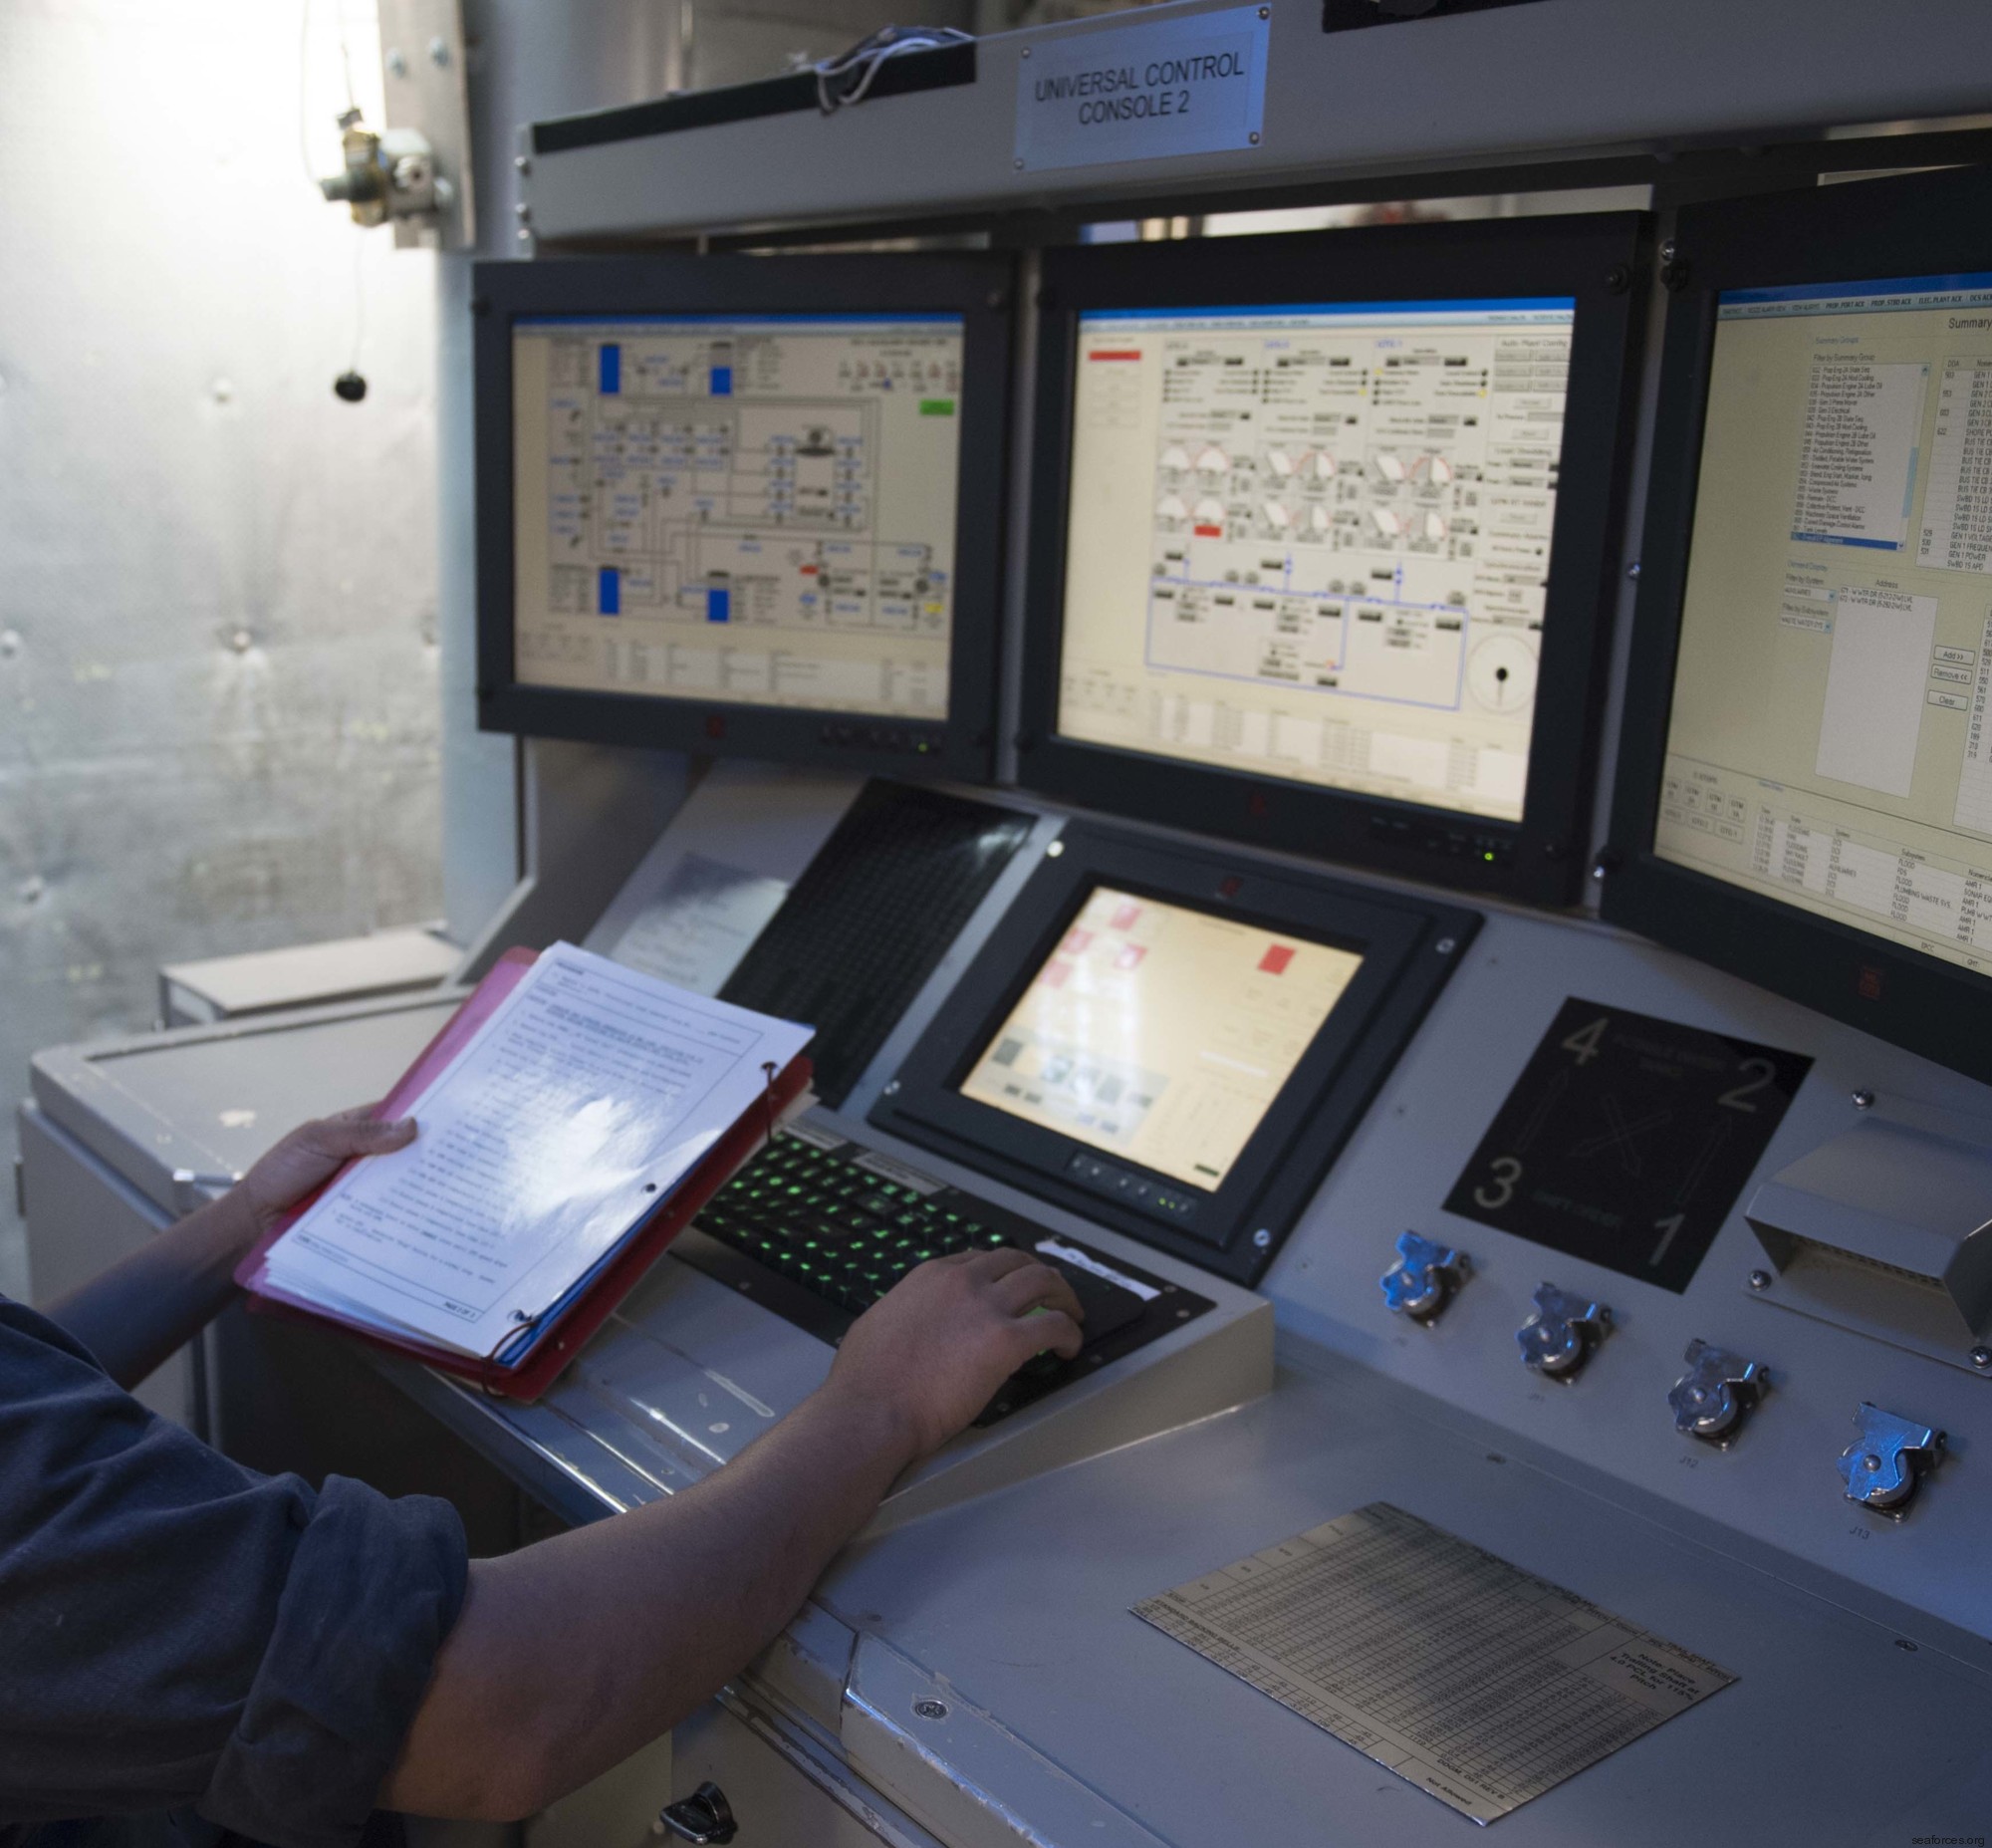 ddg-51 uss arleigh burke guided missile destroyer us navy 99 electric plant control console